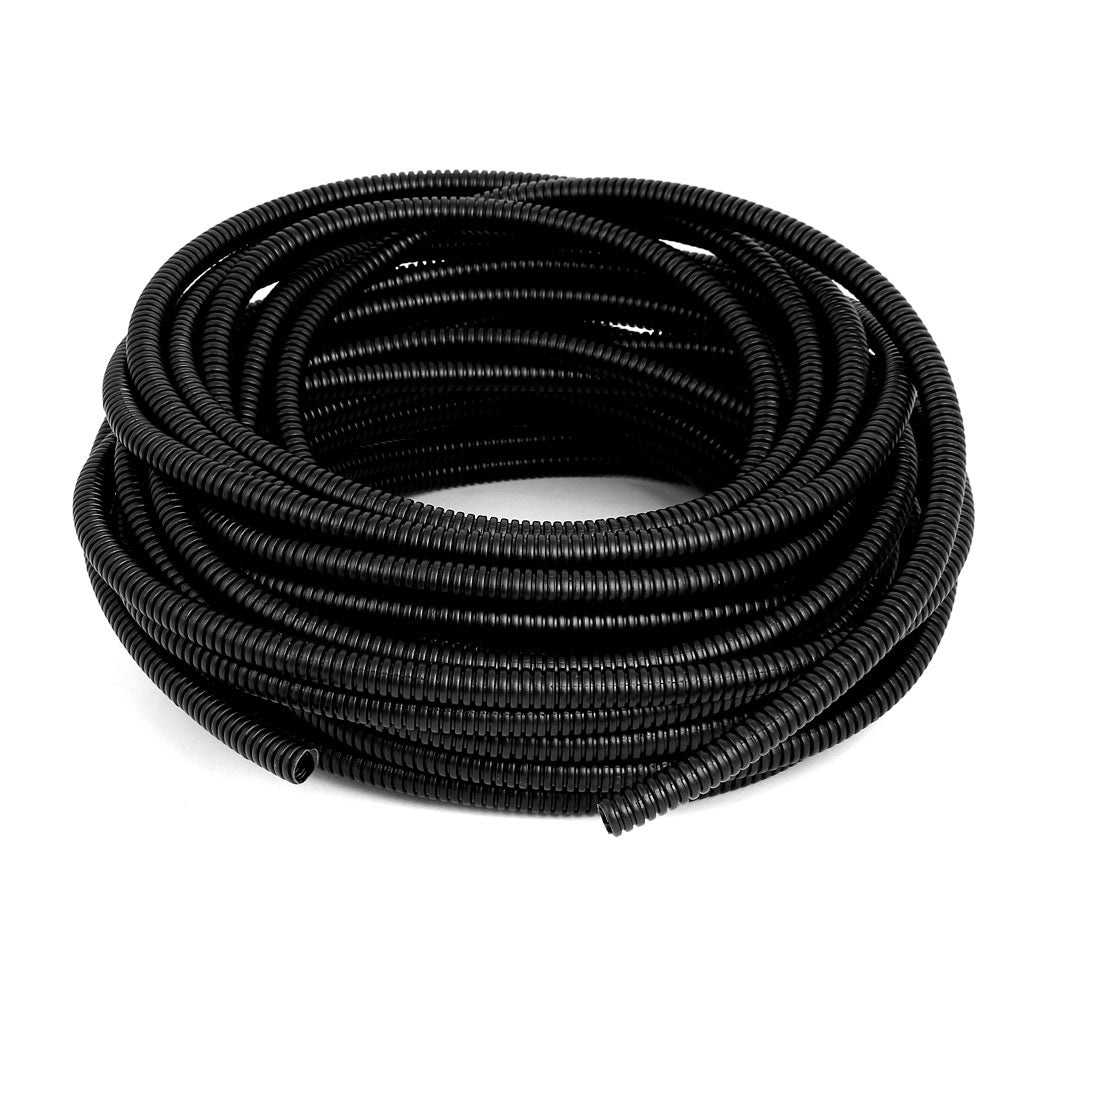 uxcell Uxcell 15 M 8 x 10 mm Plastic Flexible Corrugated Conduit Tube for Garden,Office Black